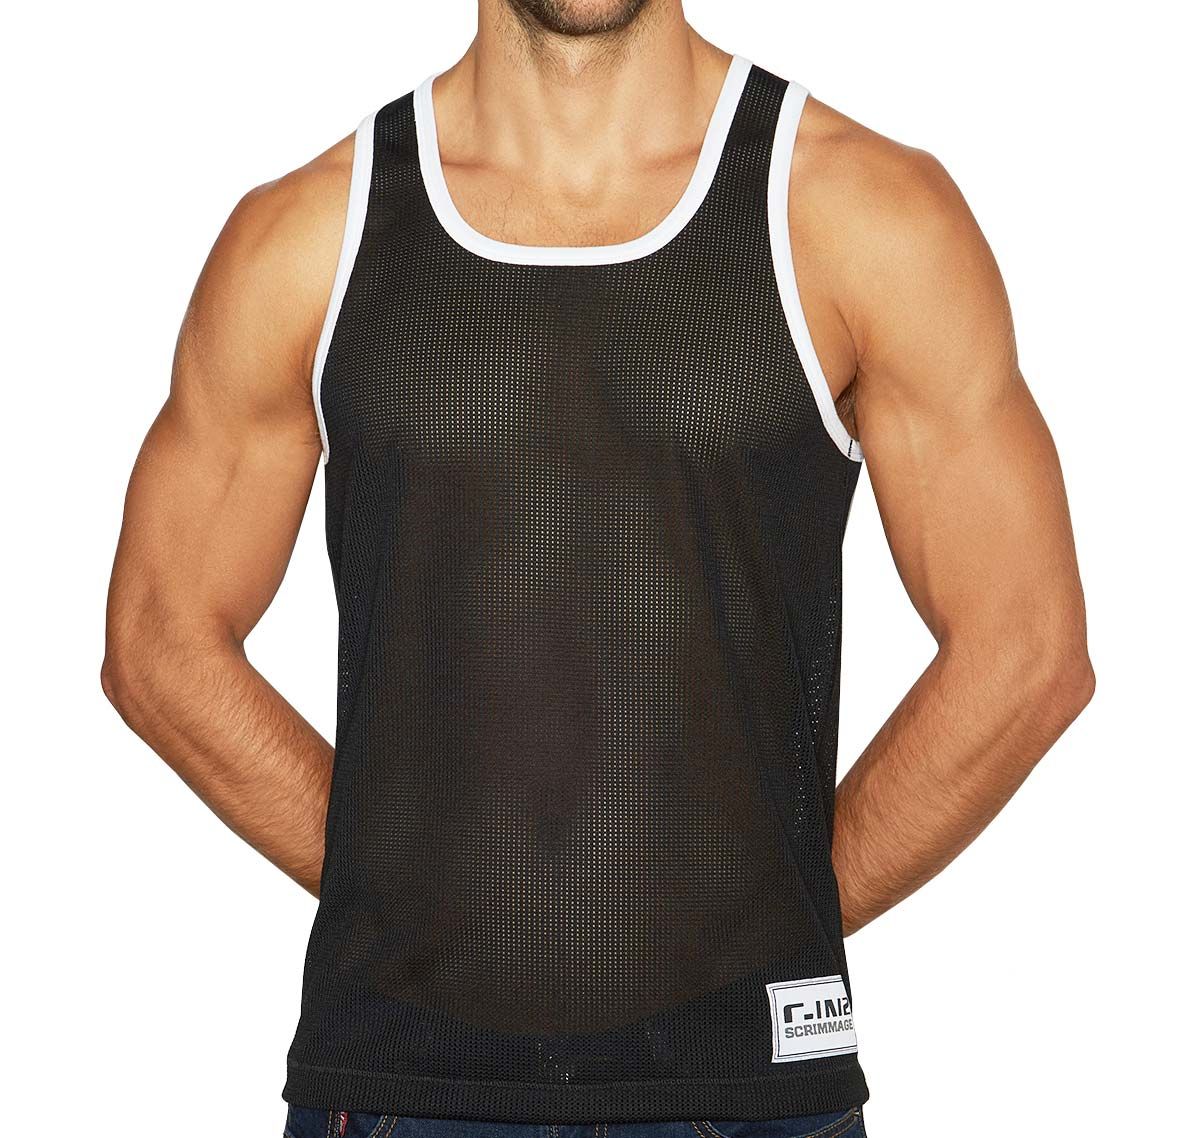 C-IN2 Canotta SCRIMMAGE RELAXED TANK 6806-002A, nero